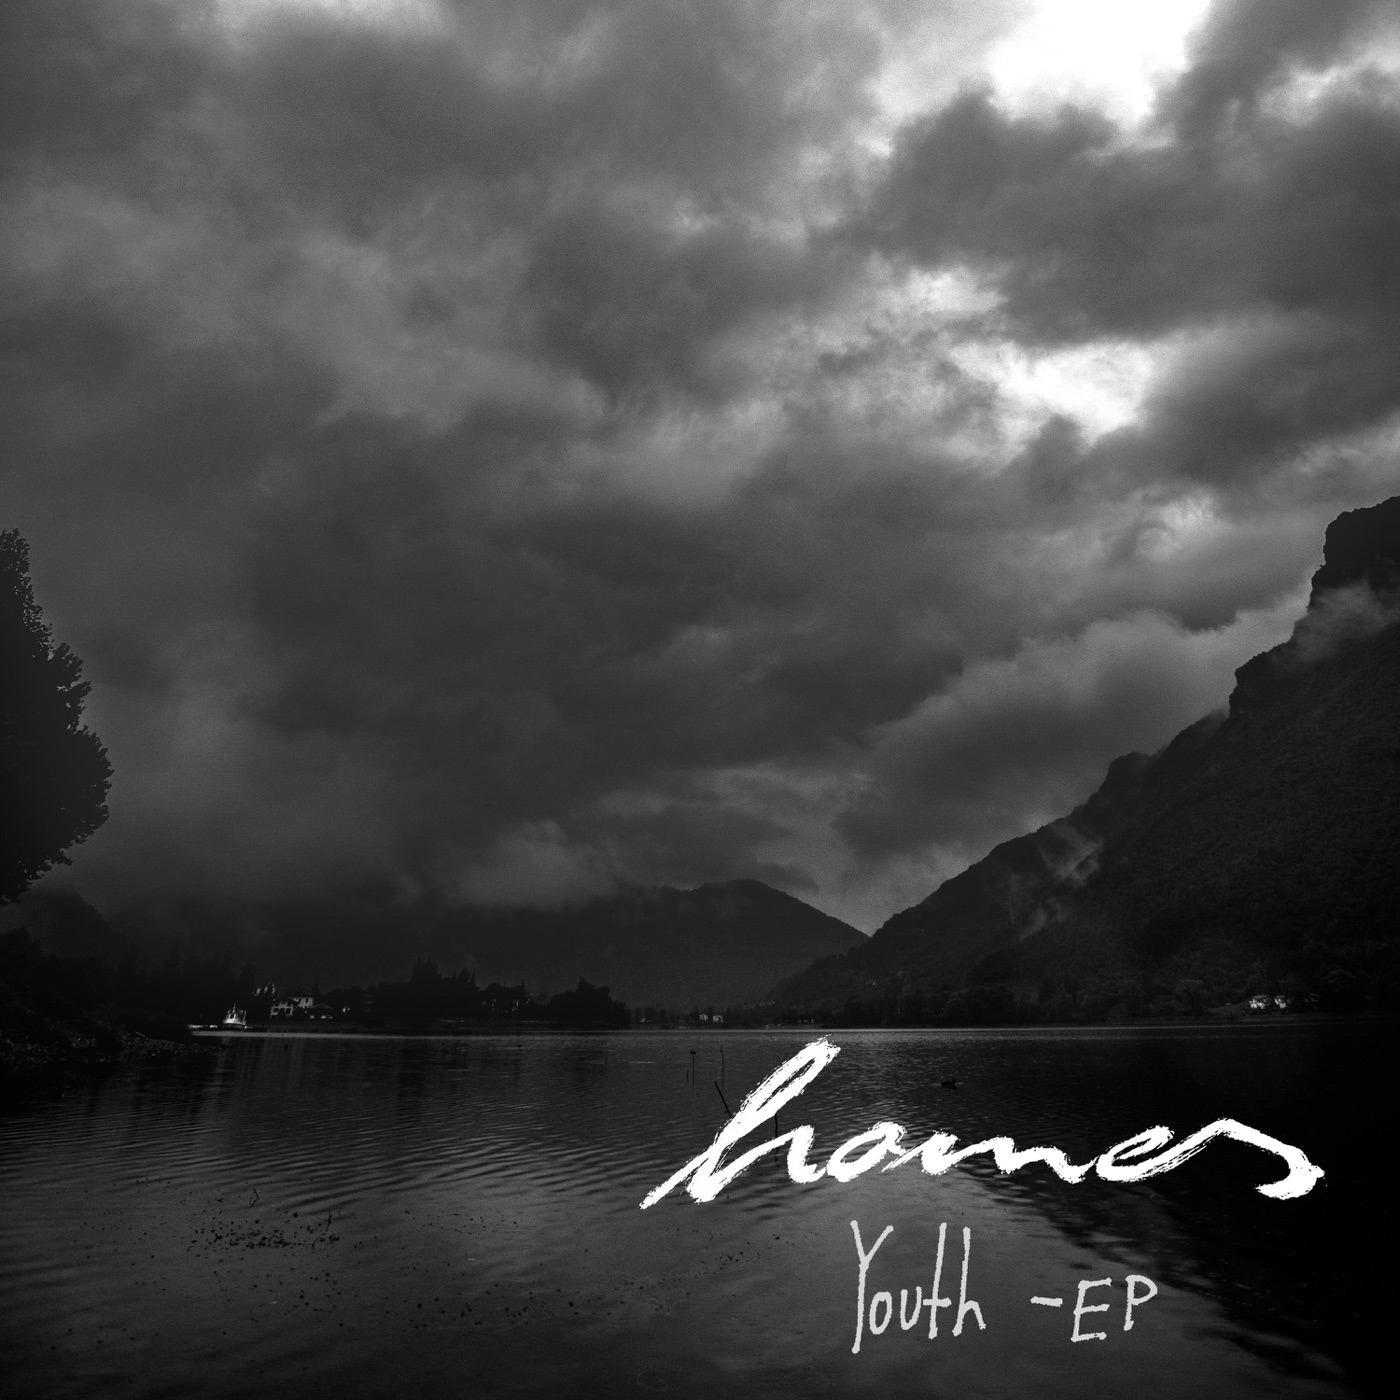 Homes - Youth [EP] (2018)